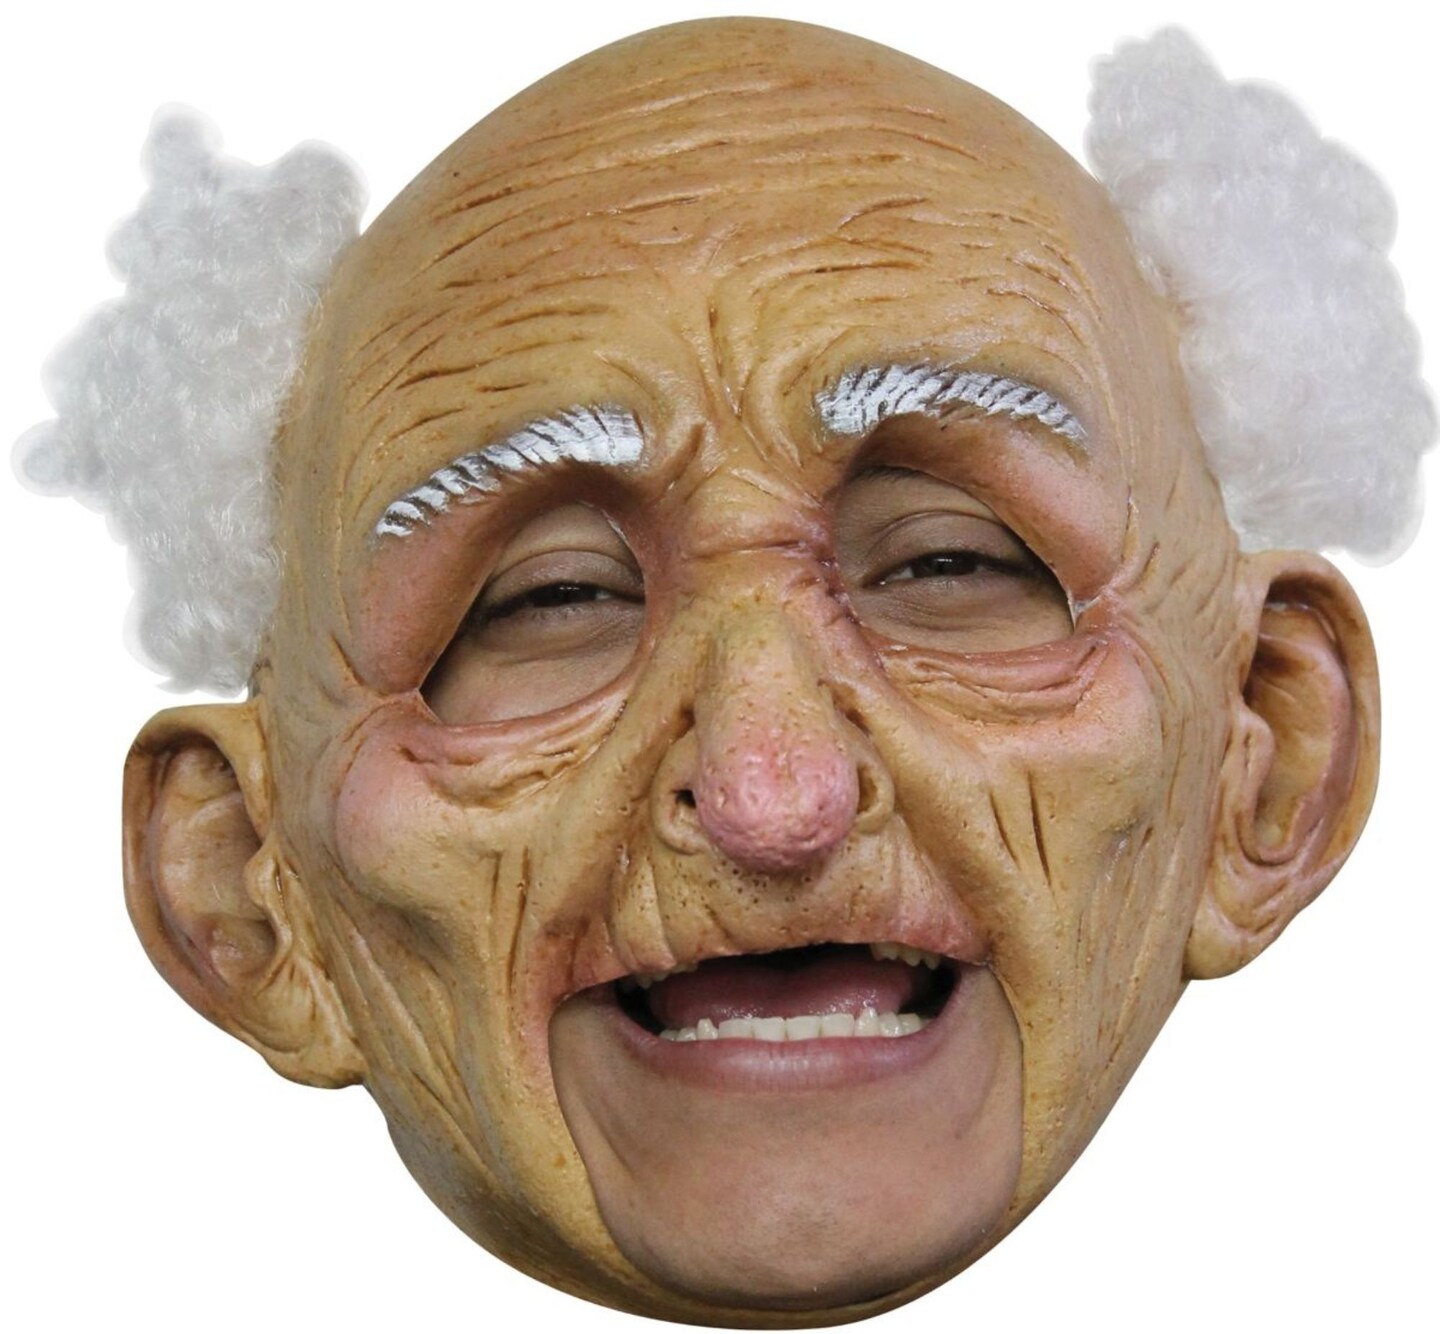 The Costume Center Beige Chinless Old Man Adult Halloween Mask Costume Accessory - One Size